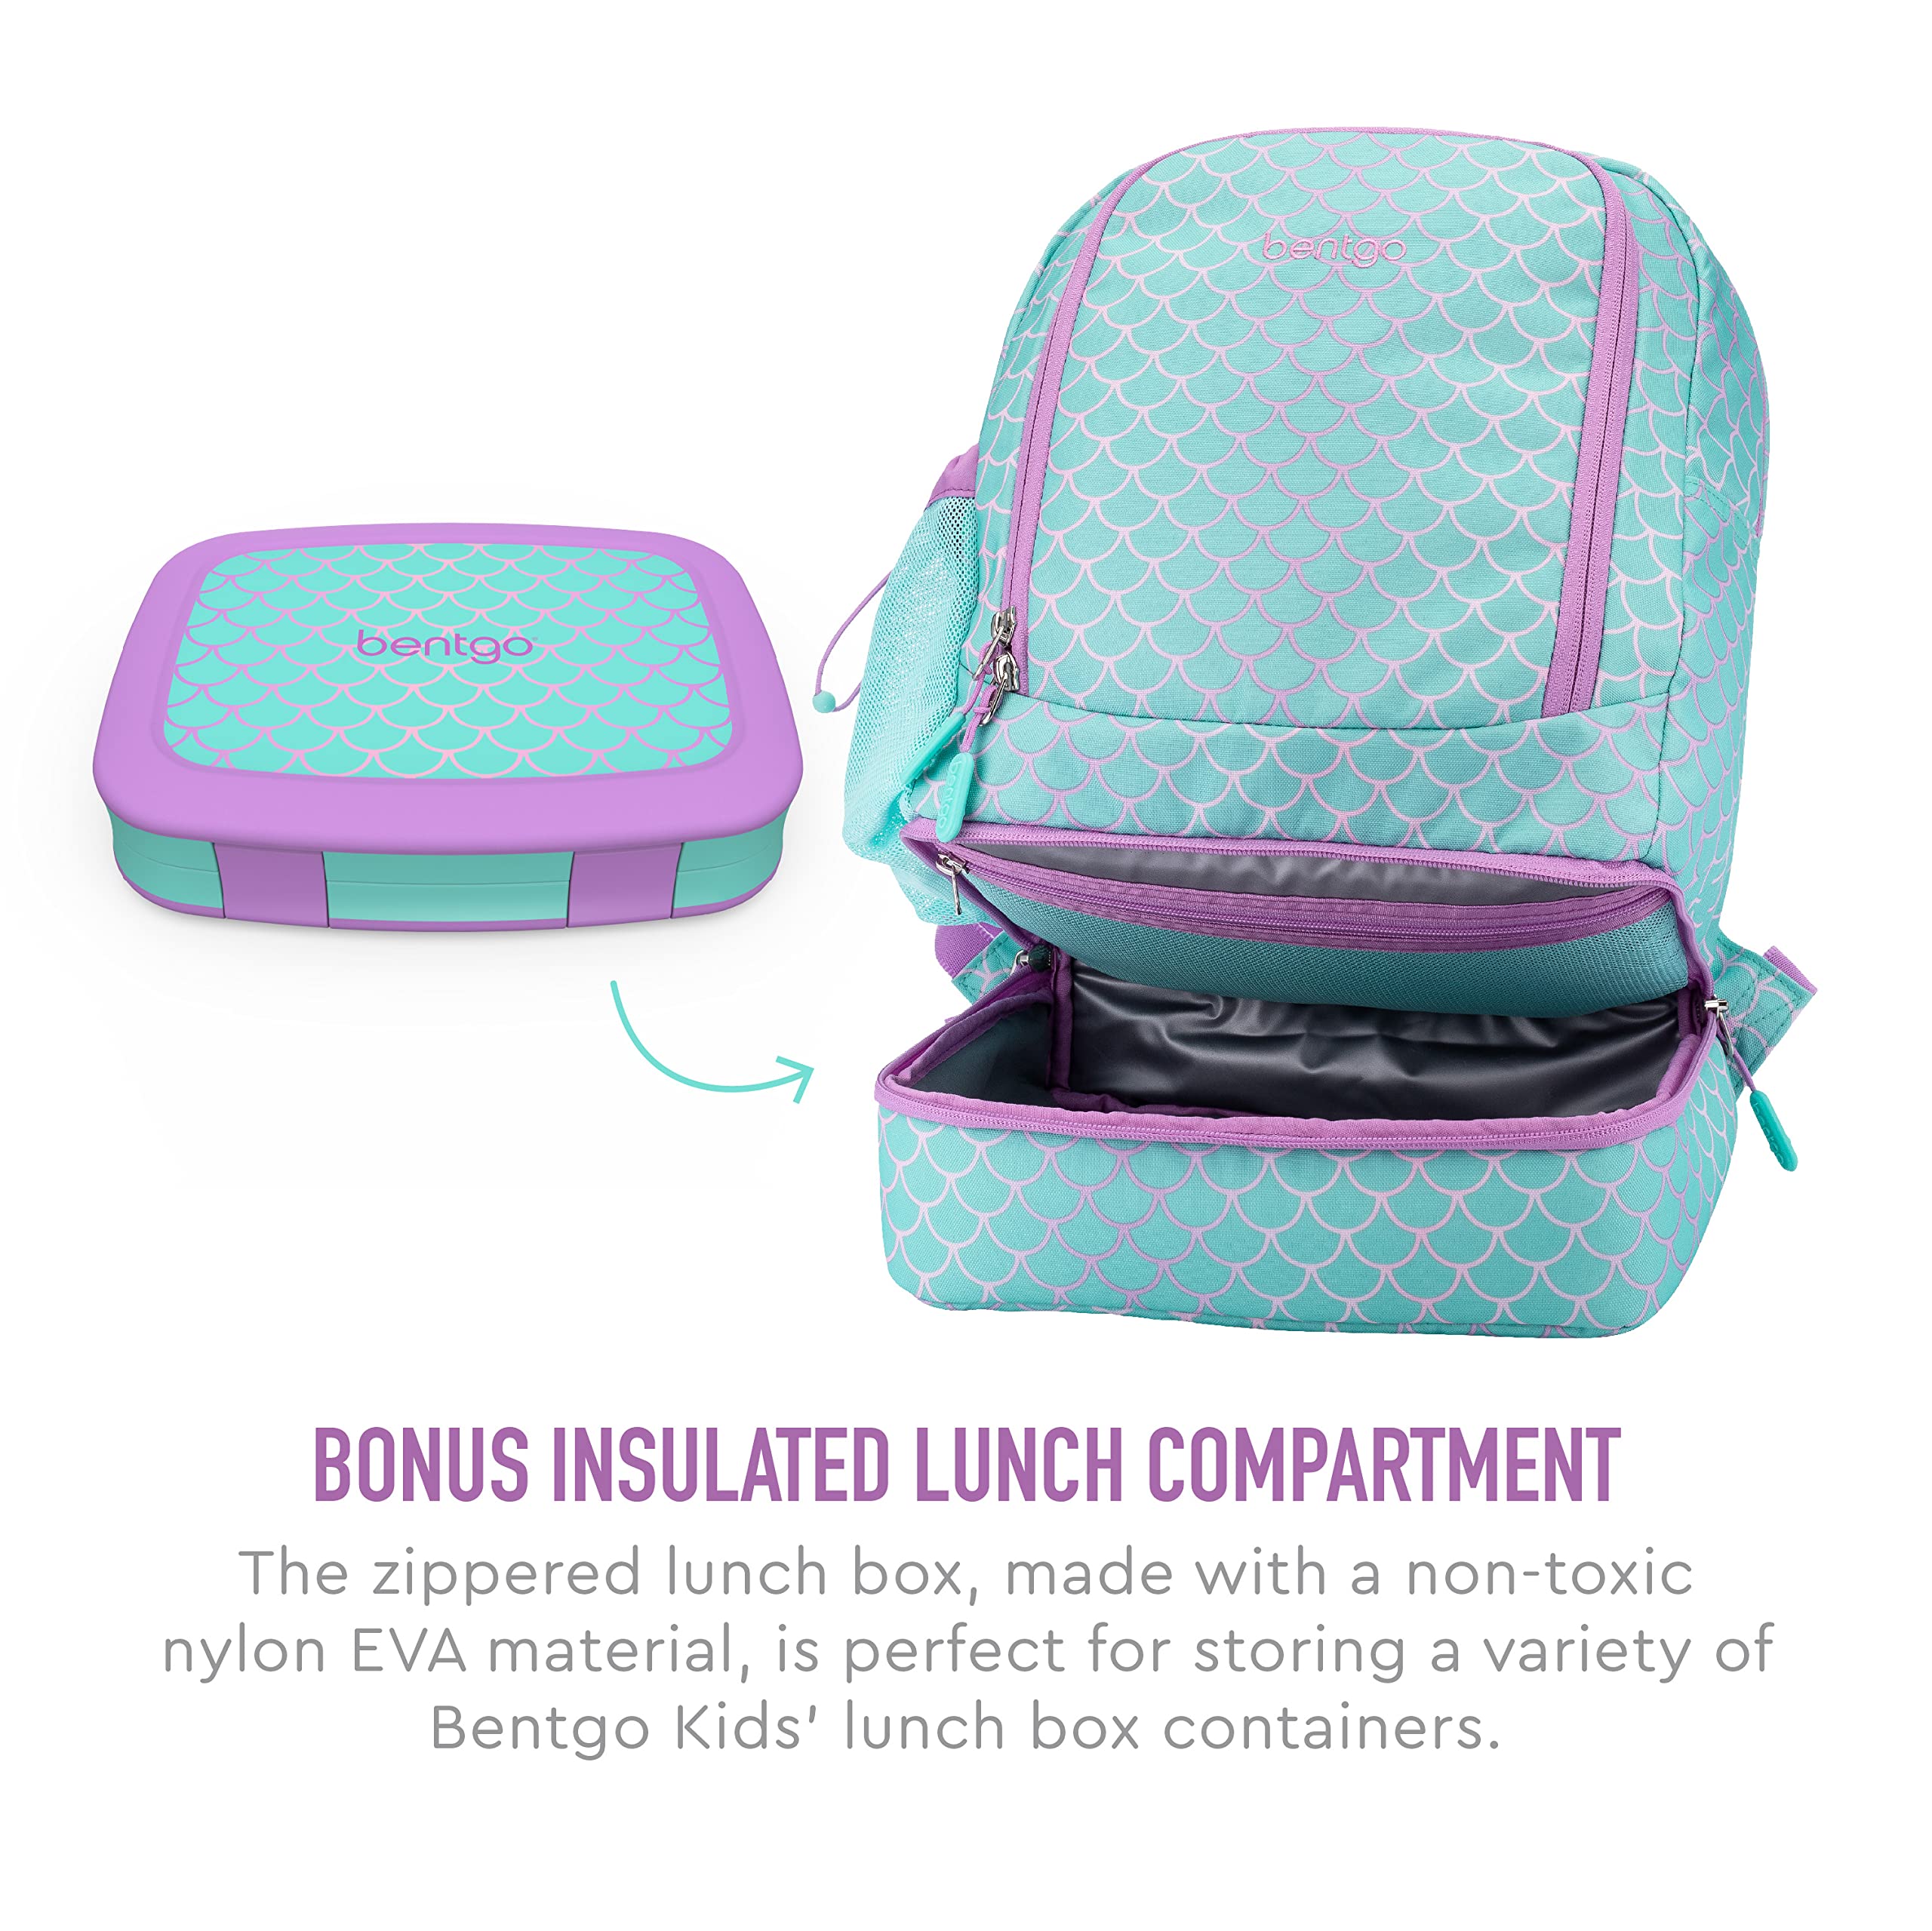 Bentgo 2-in-1 Backpack & Insulated Lunch Bag Set With Kids Prints Lunch Box (Mermaid Scales)